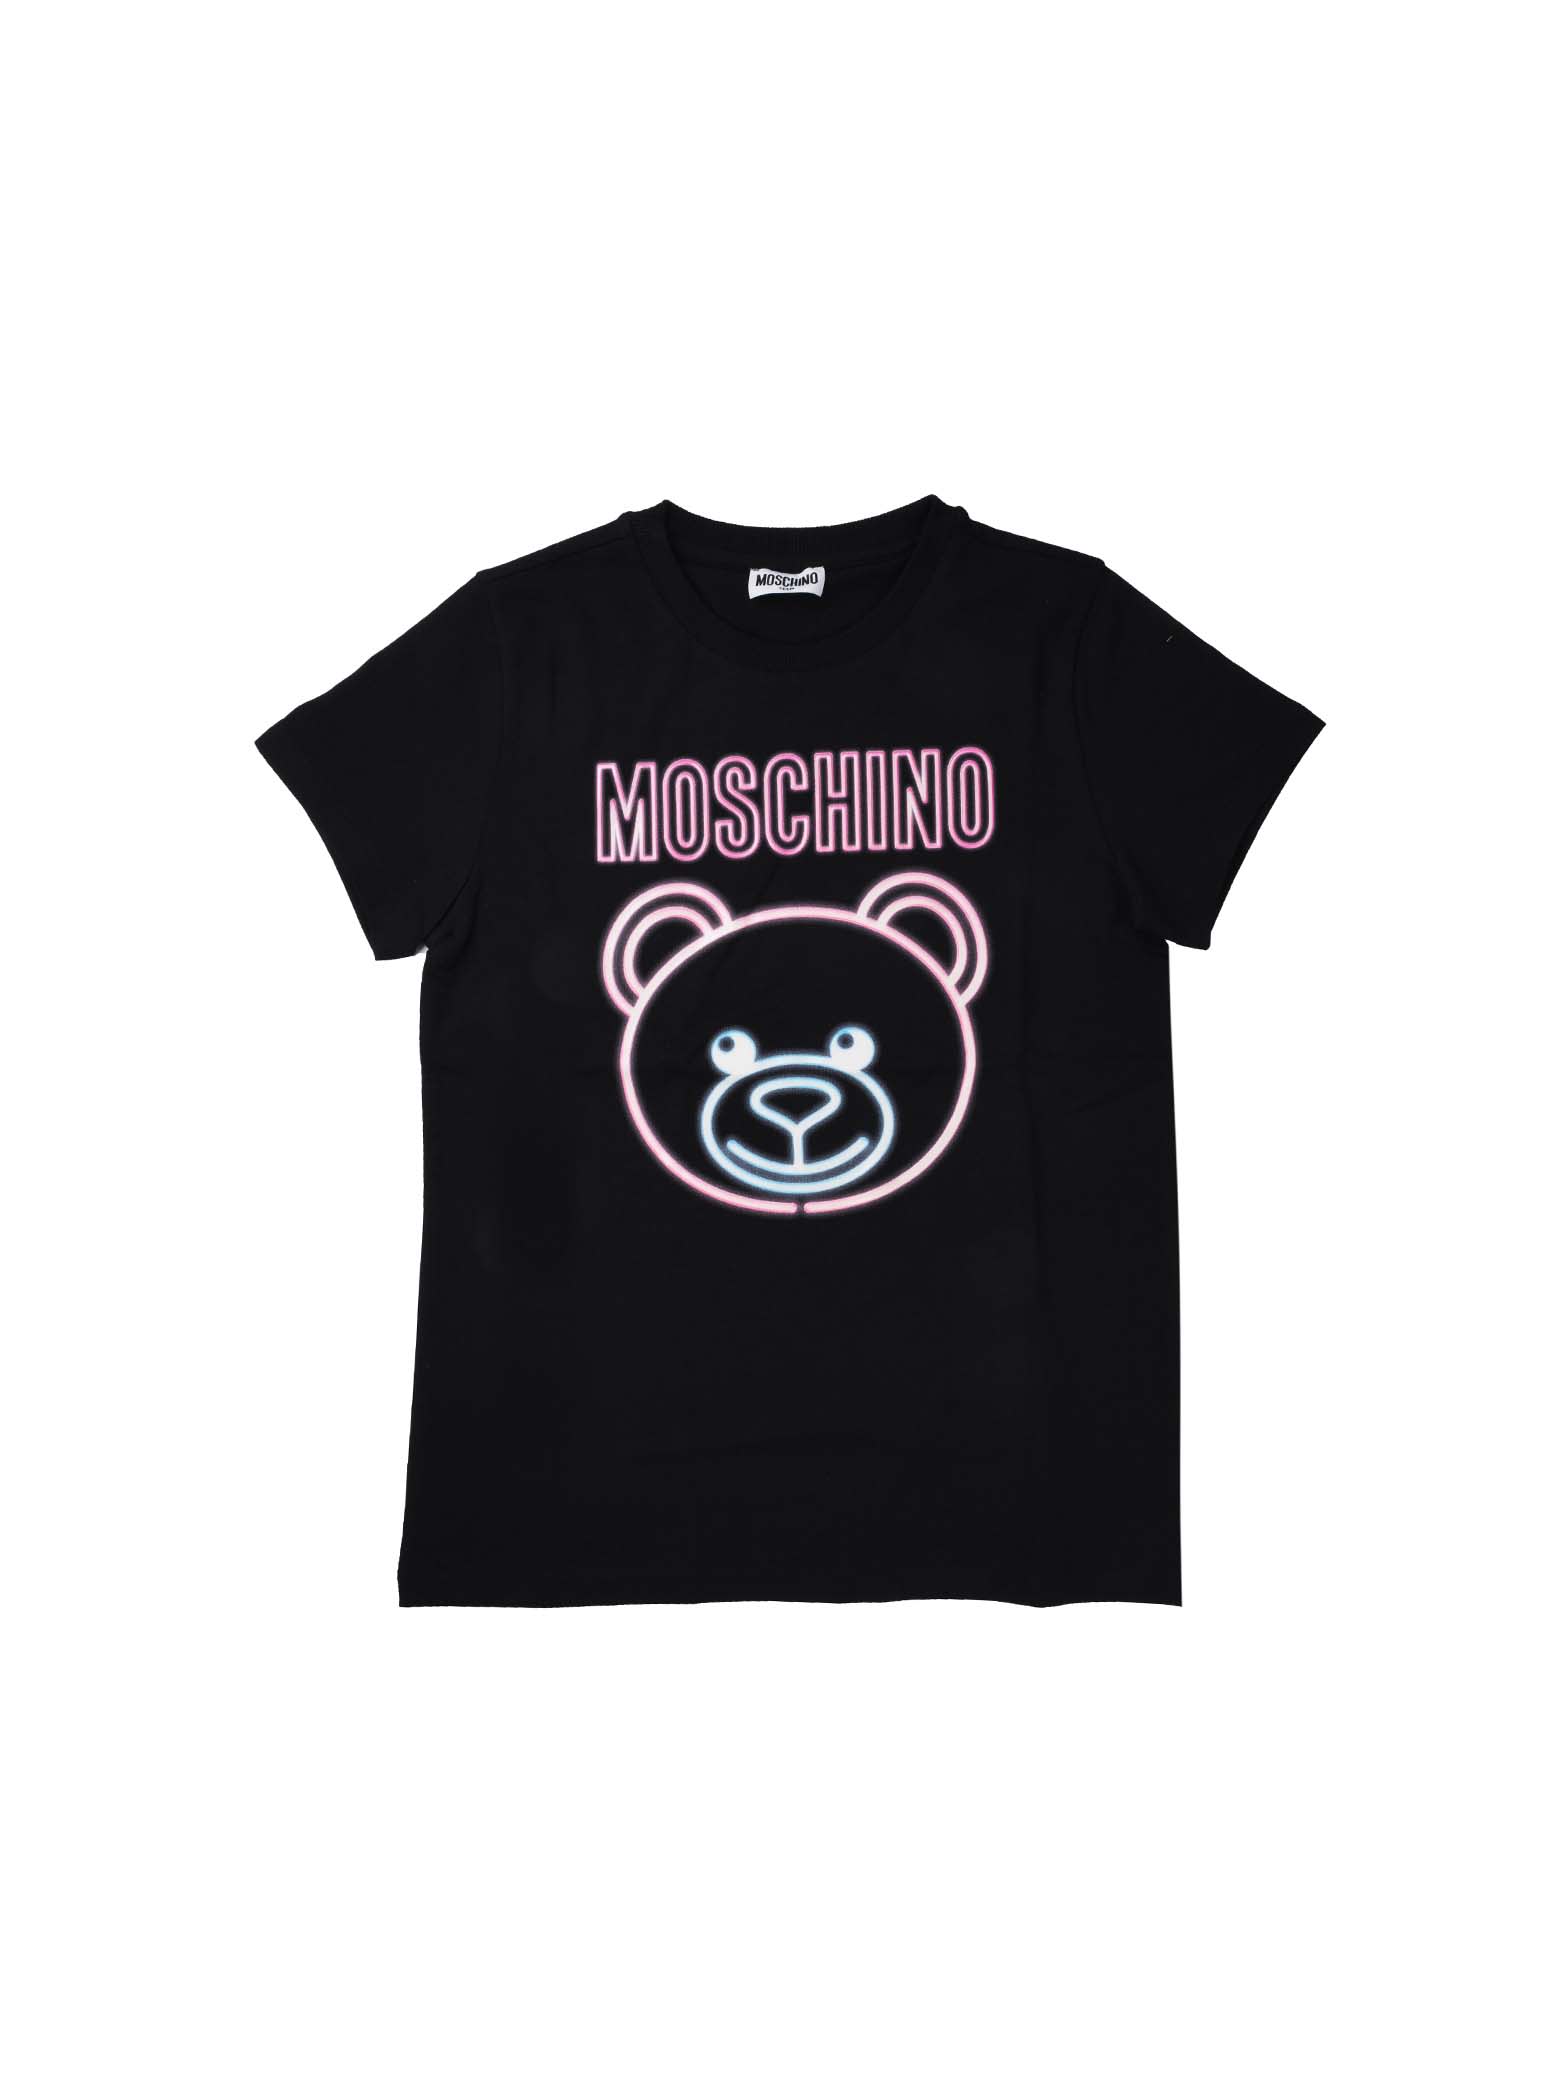 Moschino Black Short Sleeve T Shirt With Ors Shape